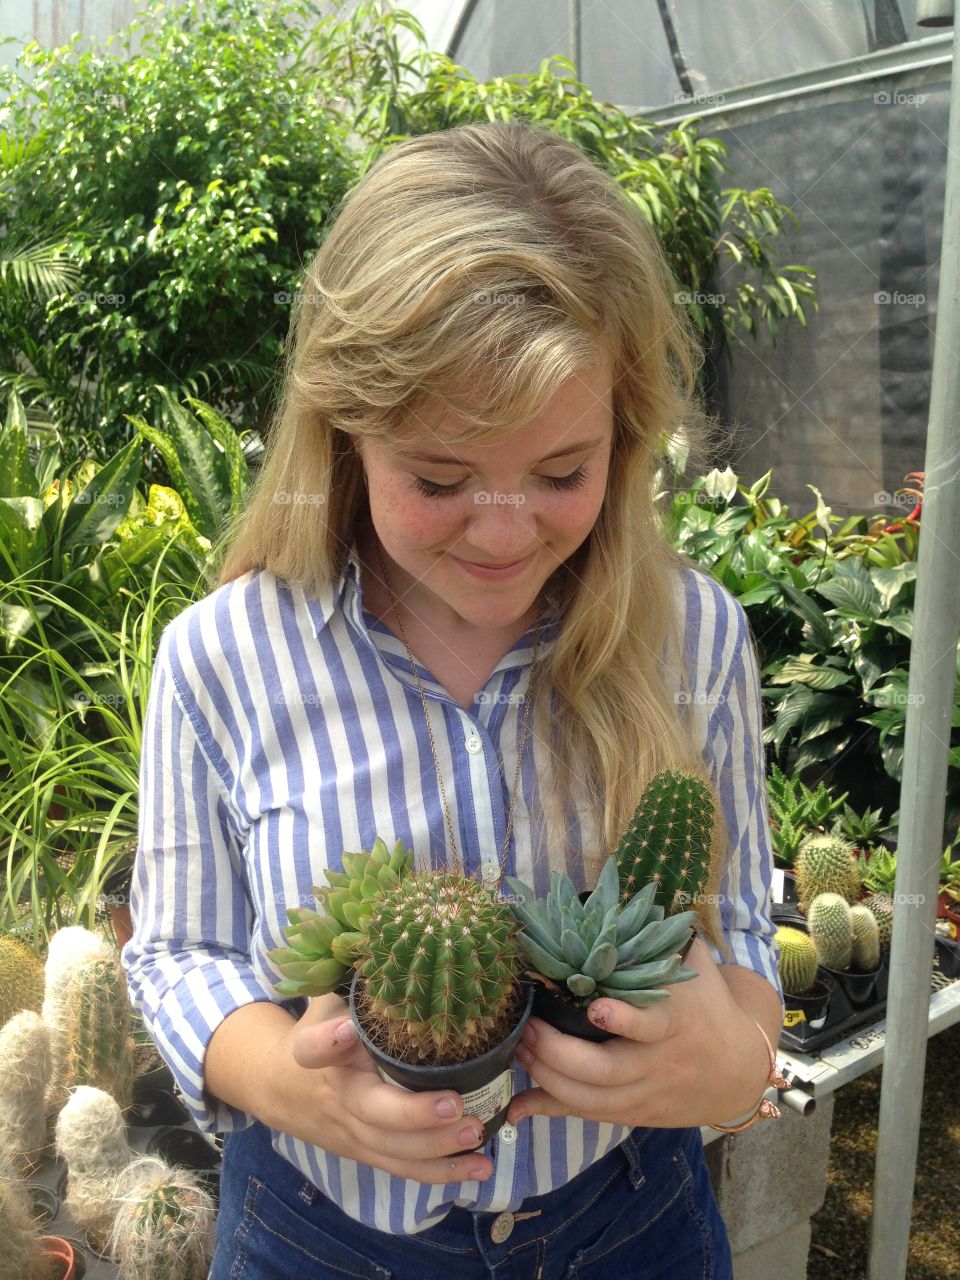 Handfuls of succulent plants, a warm greenhouse in summer. Blonde hair falling over one shoulder, a striped button-down shirt and high-waisted shorts